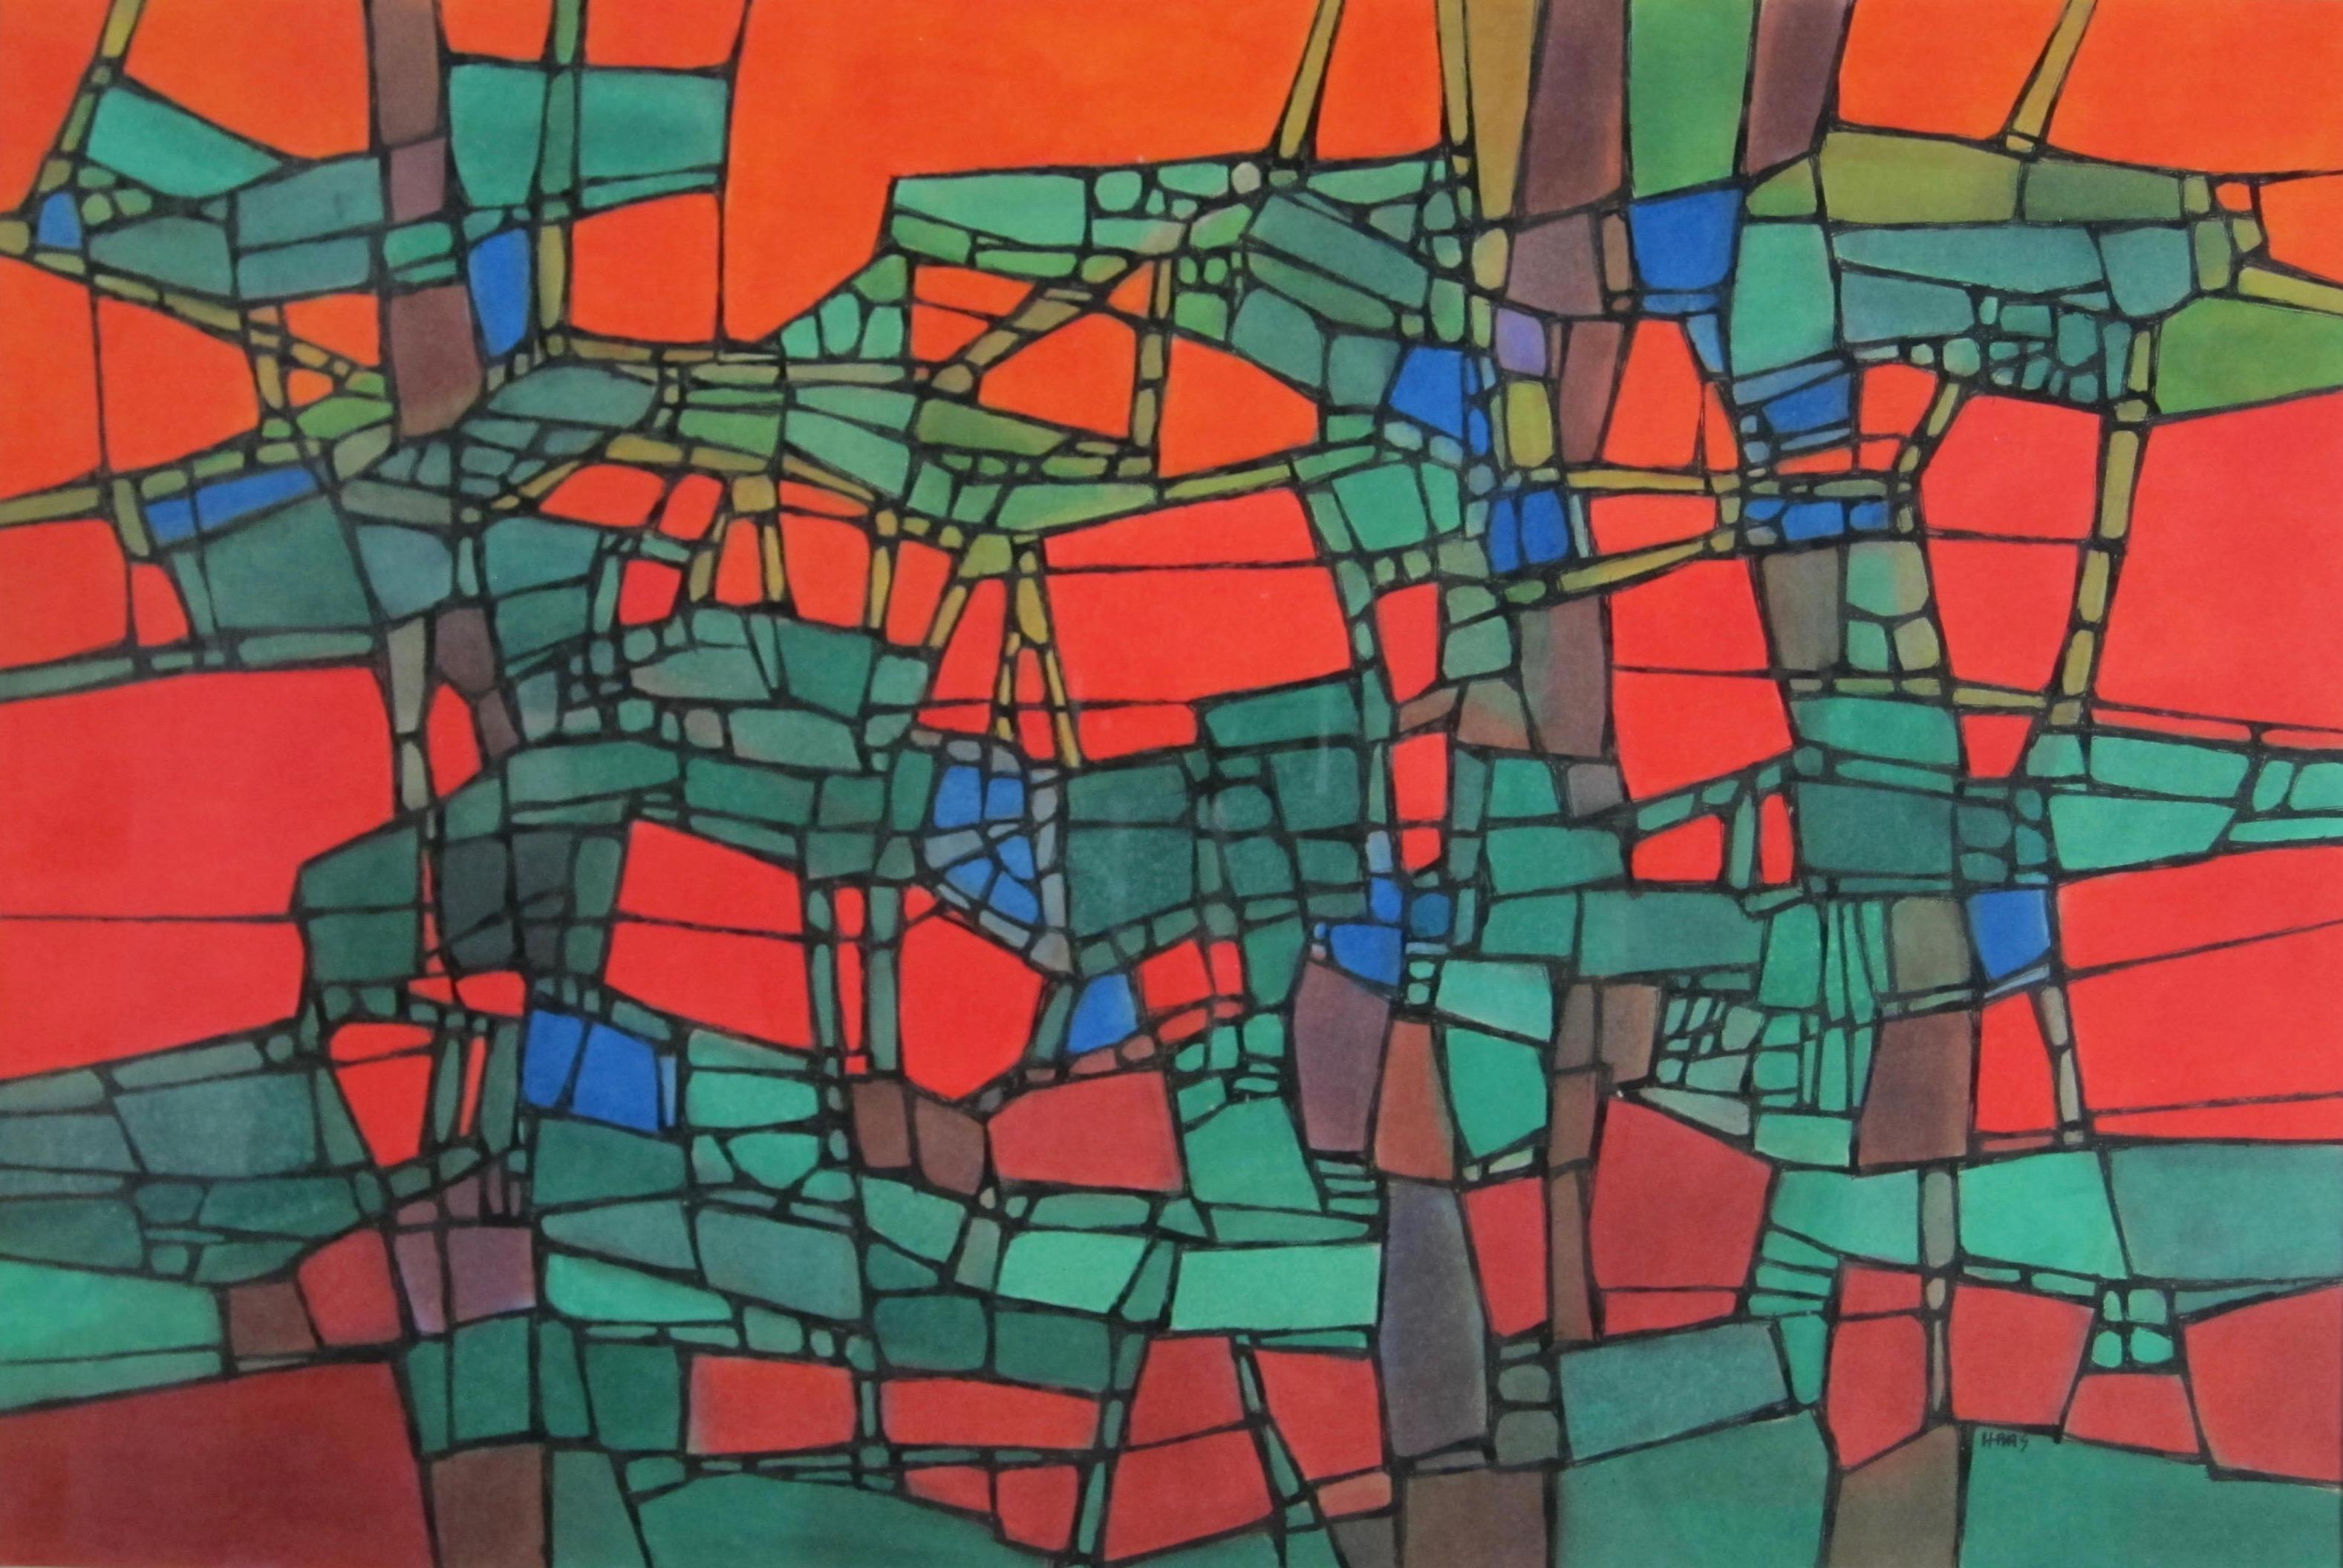 Bright and boldly colored abstract painting by San Francisco Bay Area artist Hildegarde Haas.  This work was not titled by the artist so interpretation is up to the viewer.  Haas loved to study and paint scenes from nature, but is also known for her